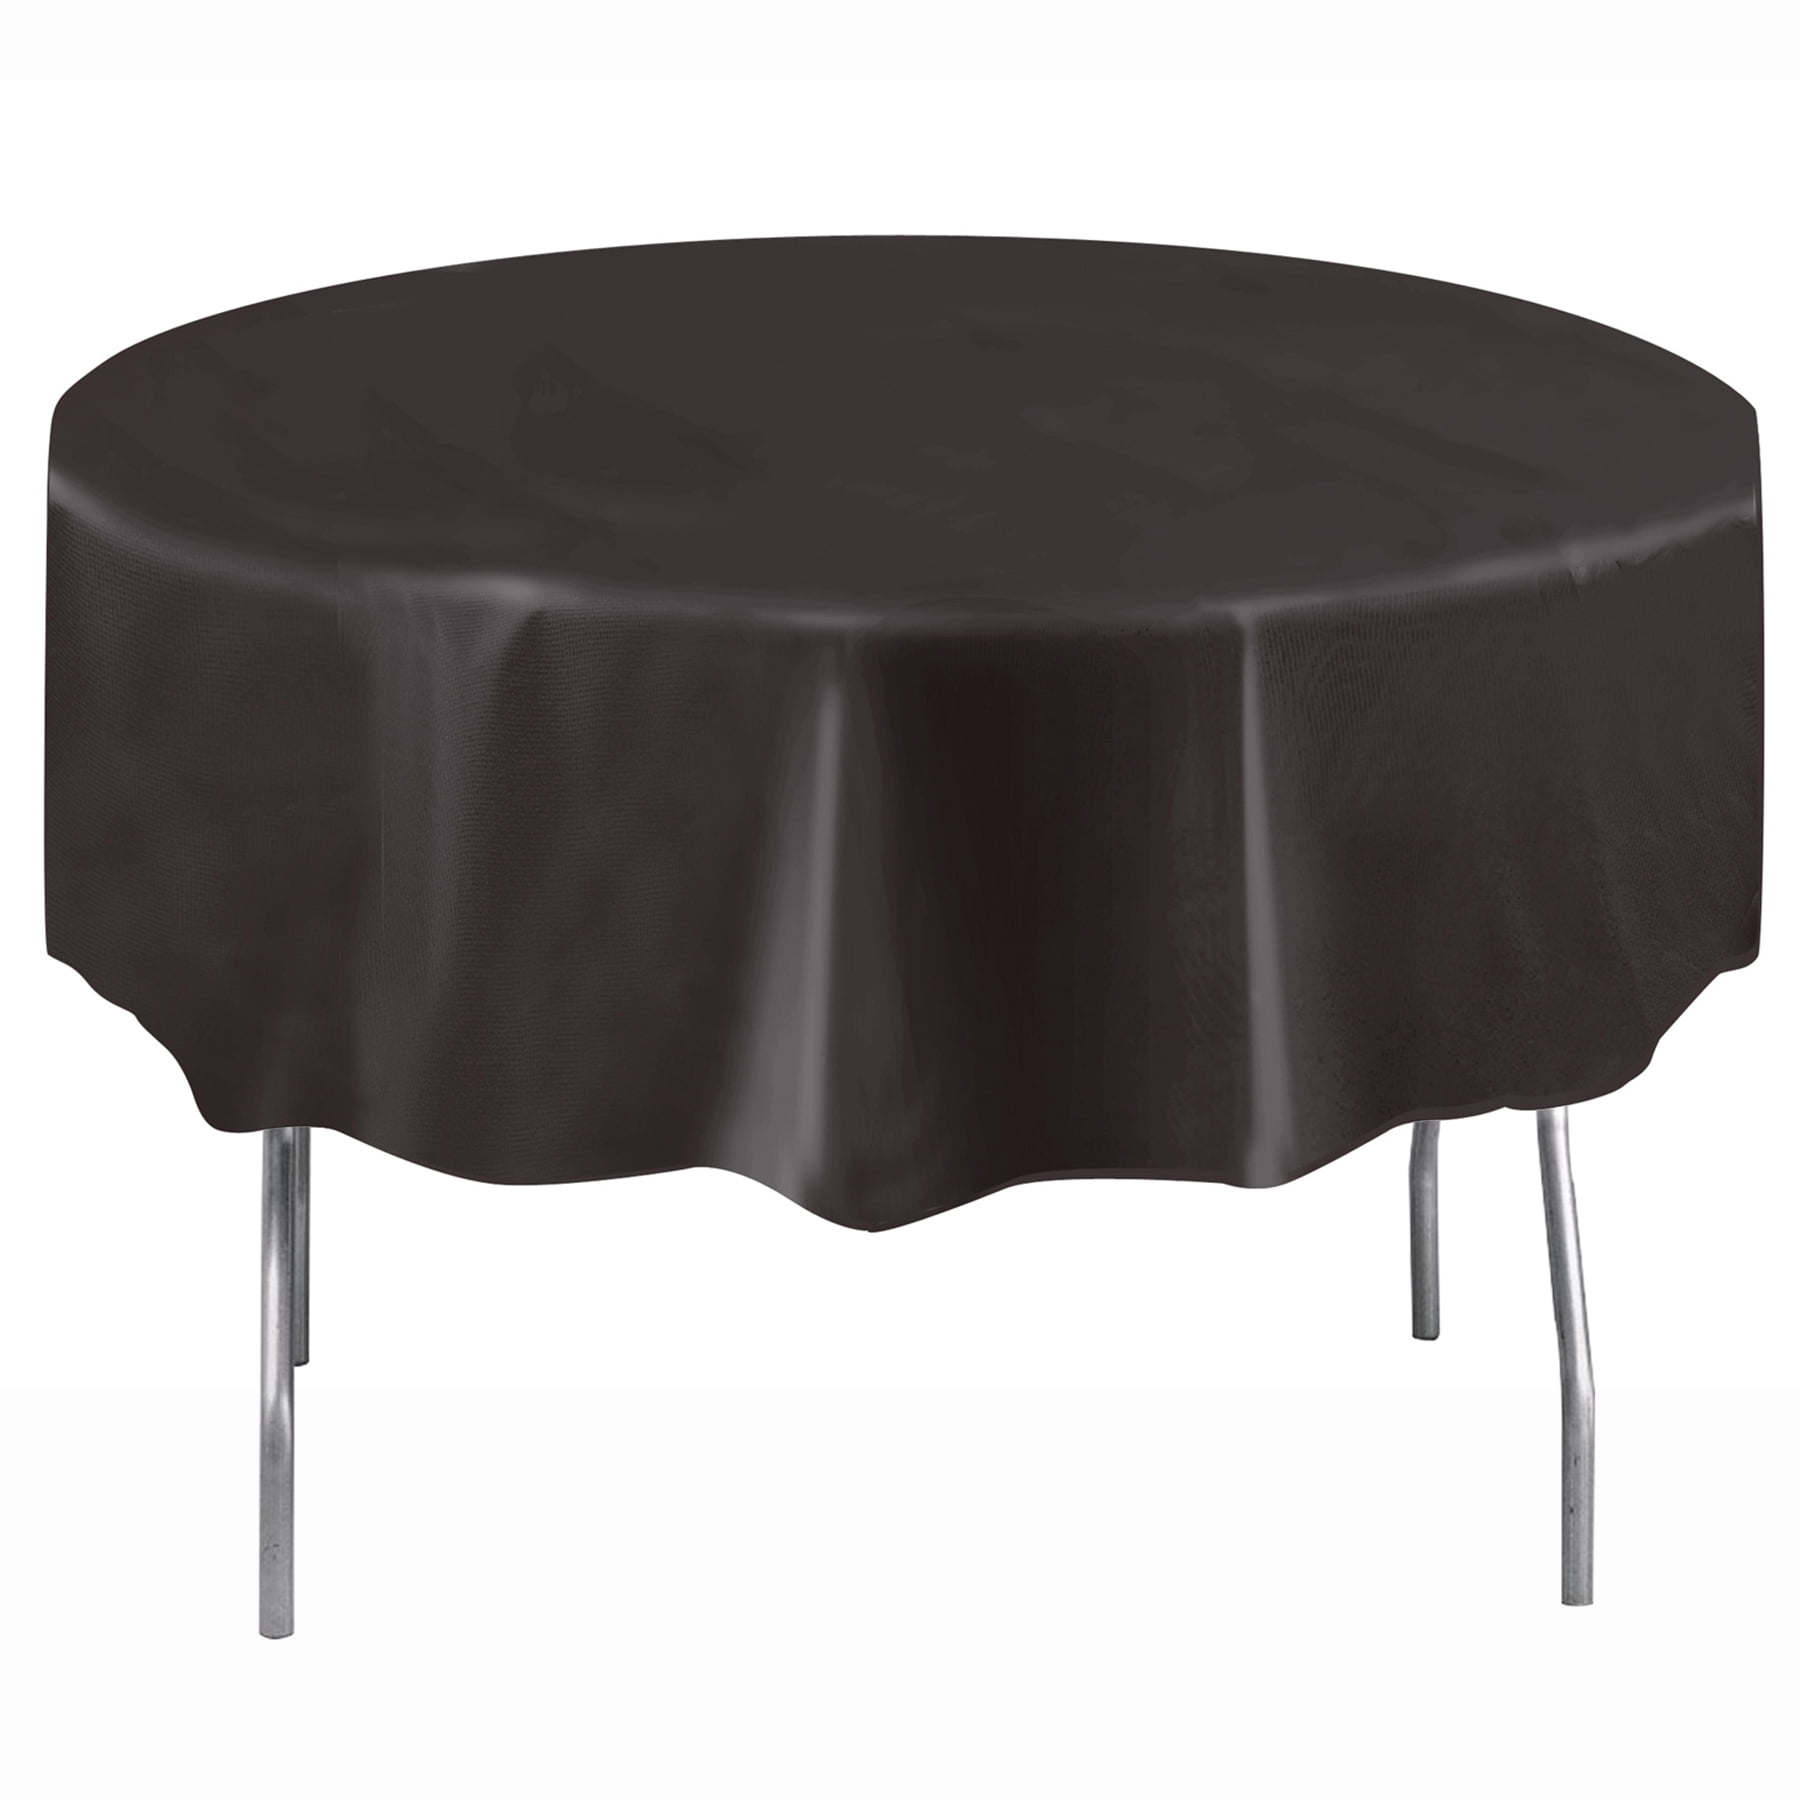 Plastic Round Tablecloths, 84 in, Black, 2ct